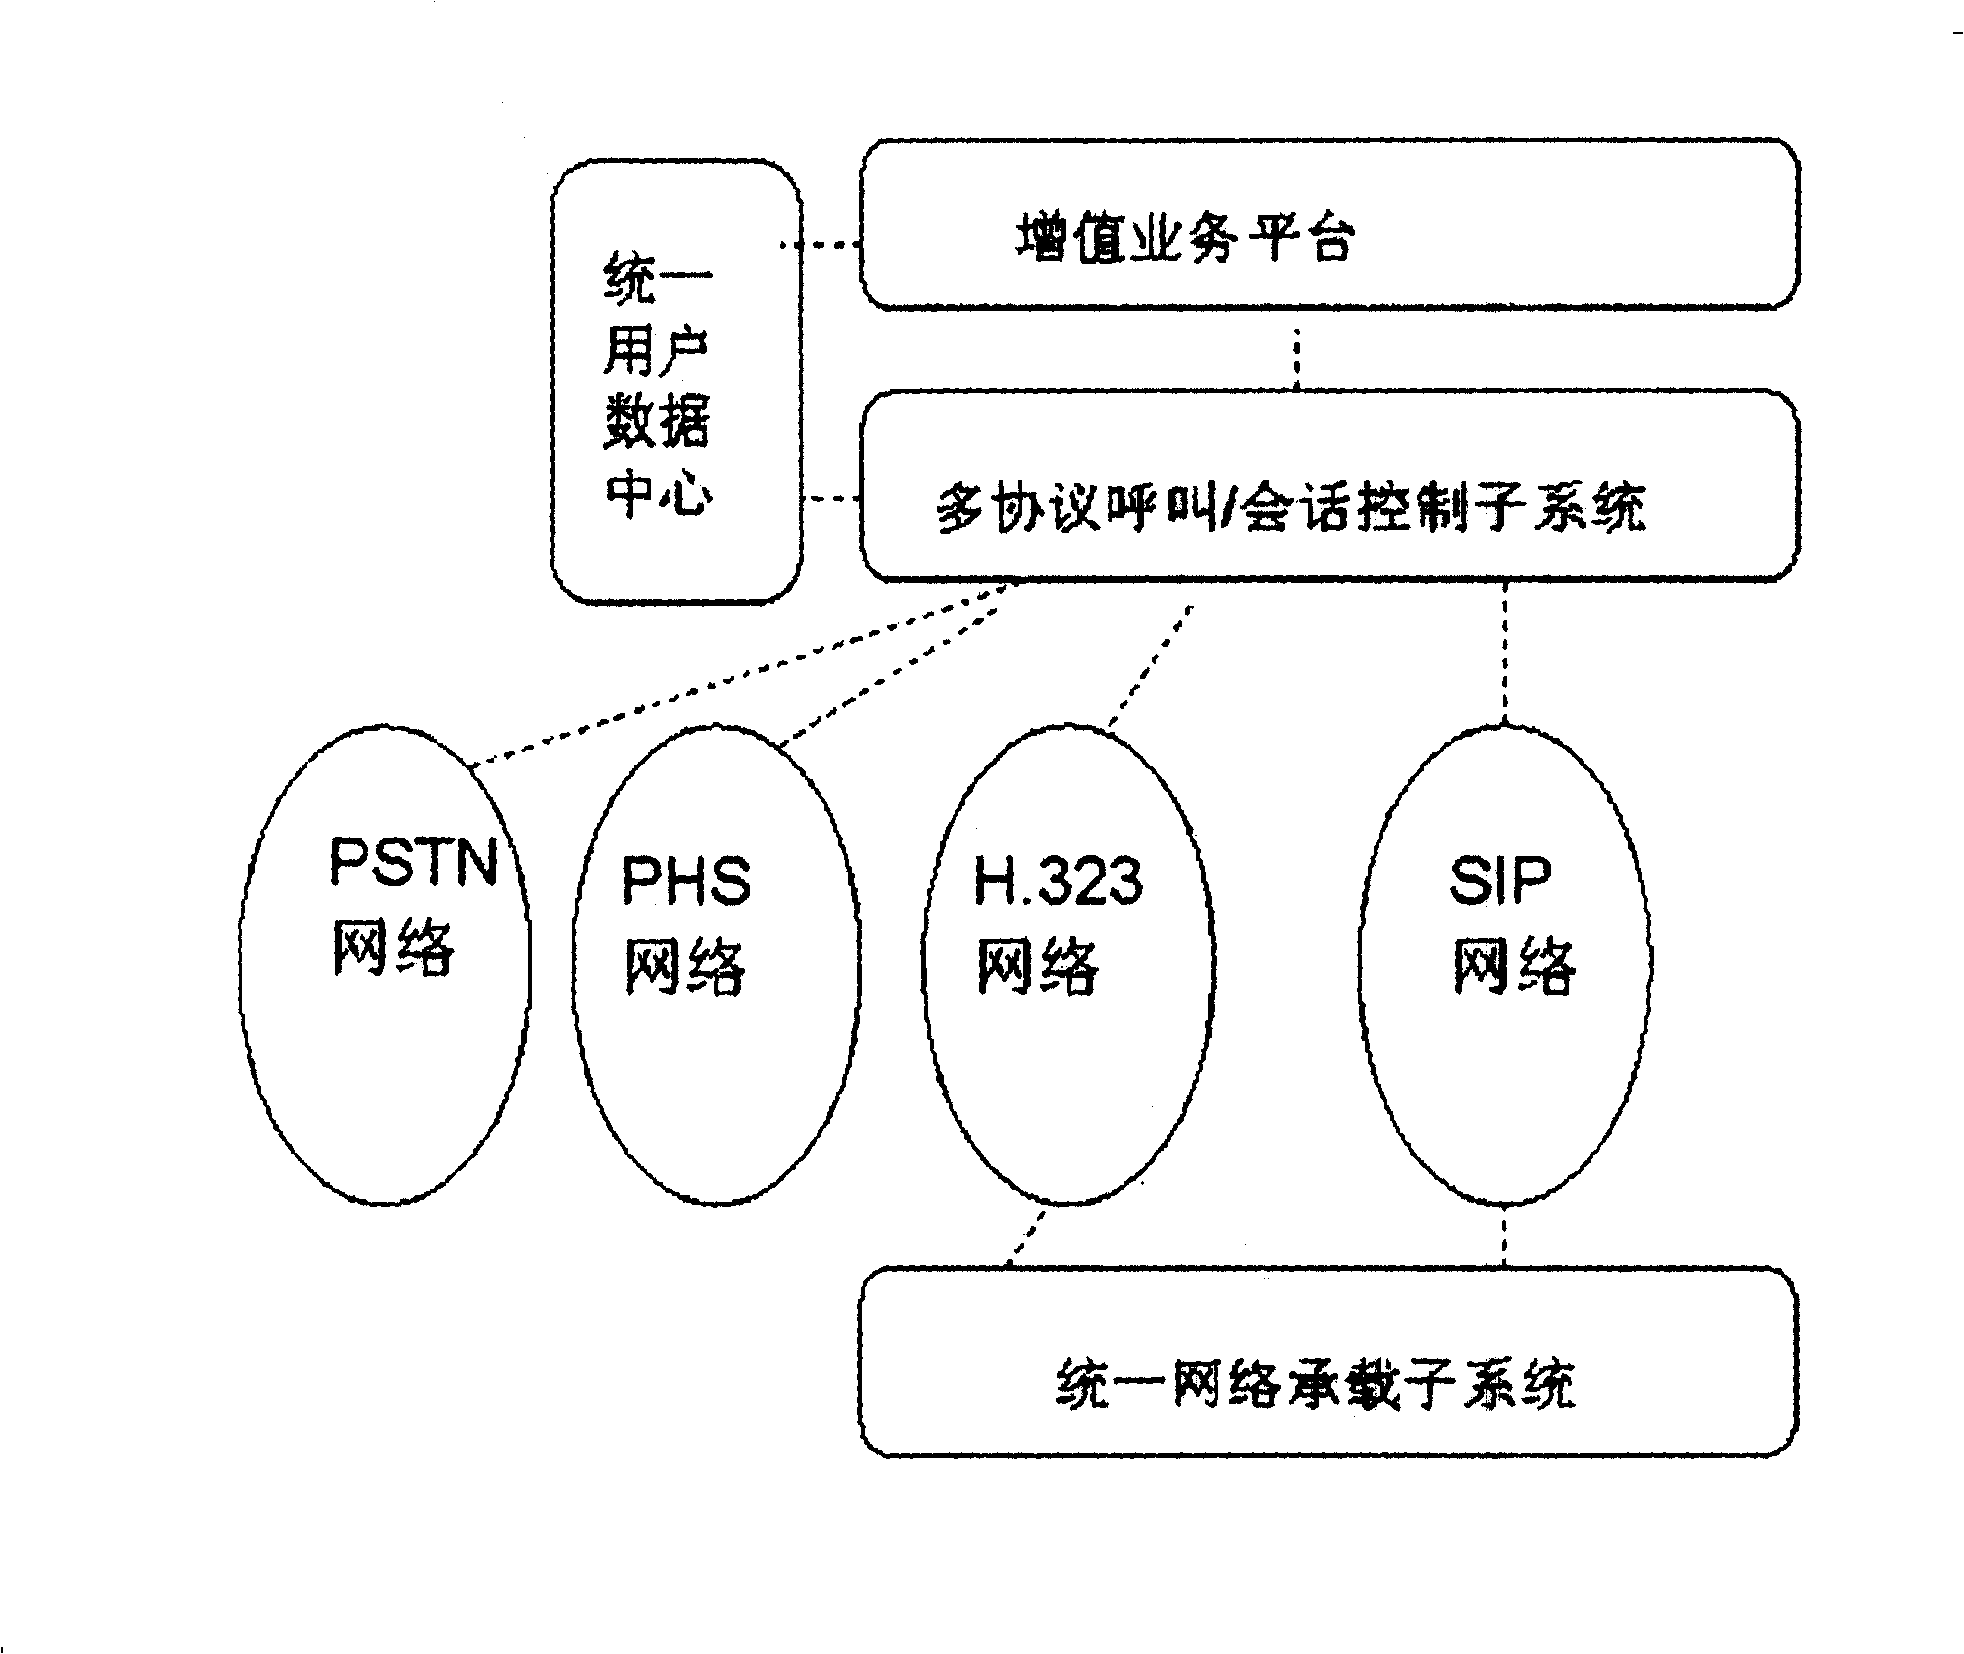 System and method for implementing network and service amalgamation and unified control